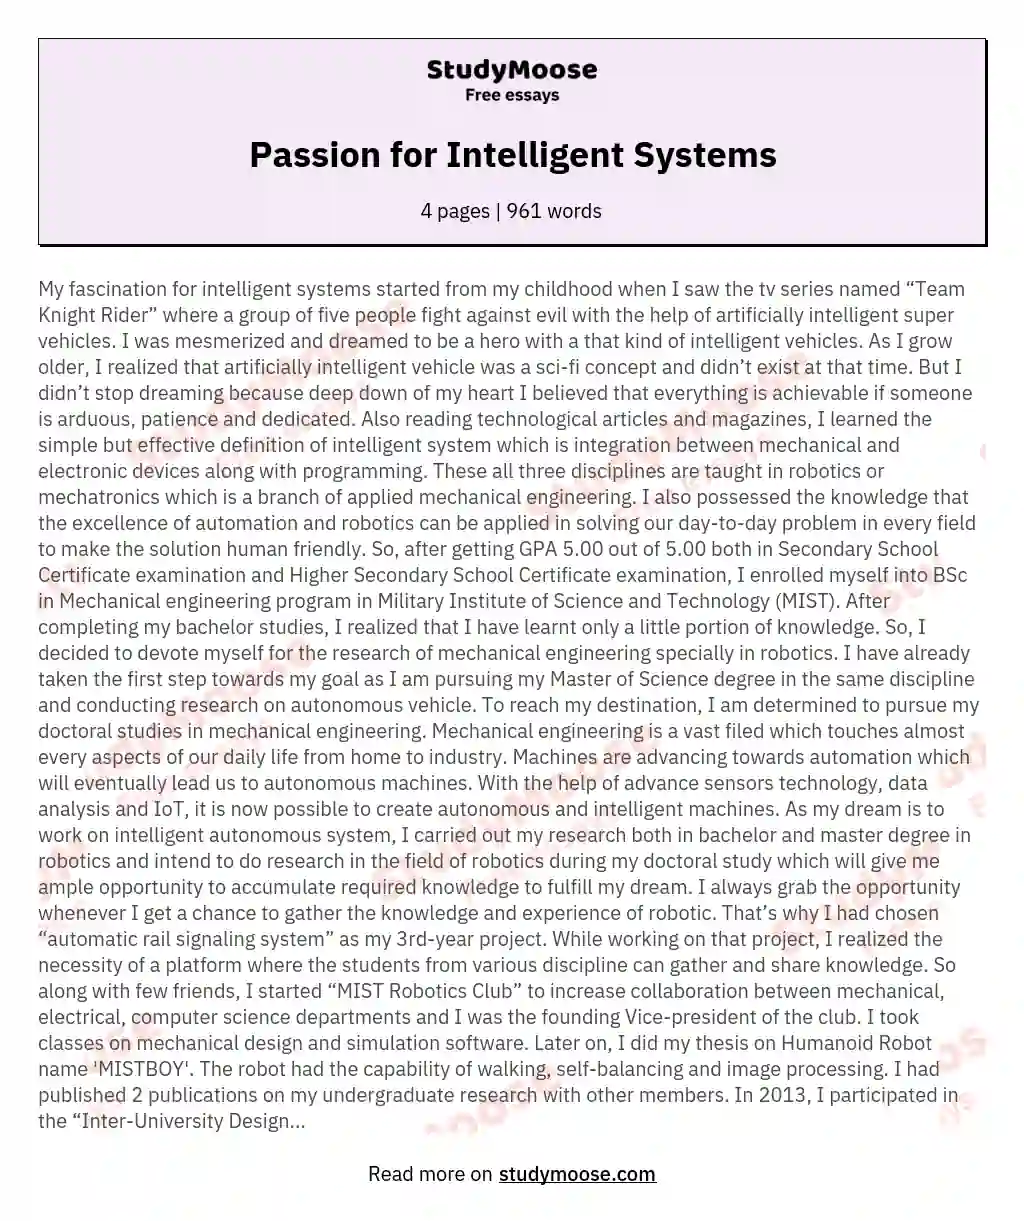 Passion for Intelligent Systems essay